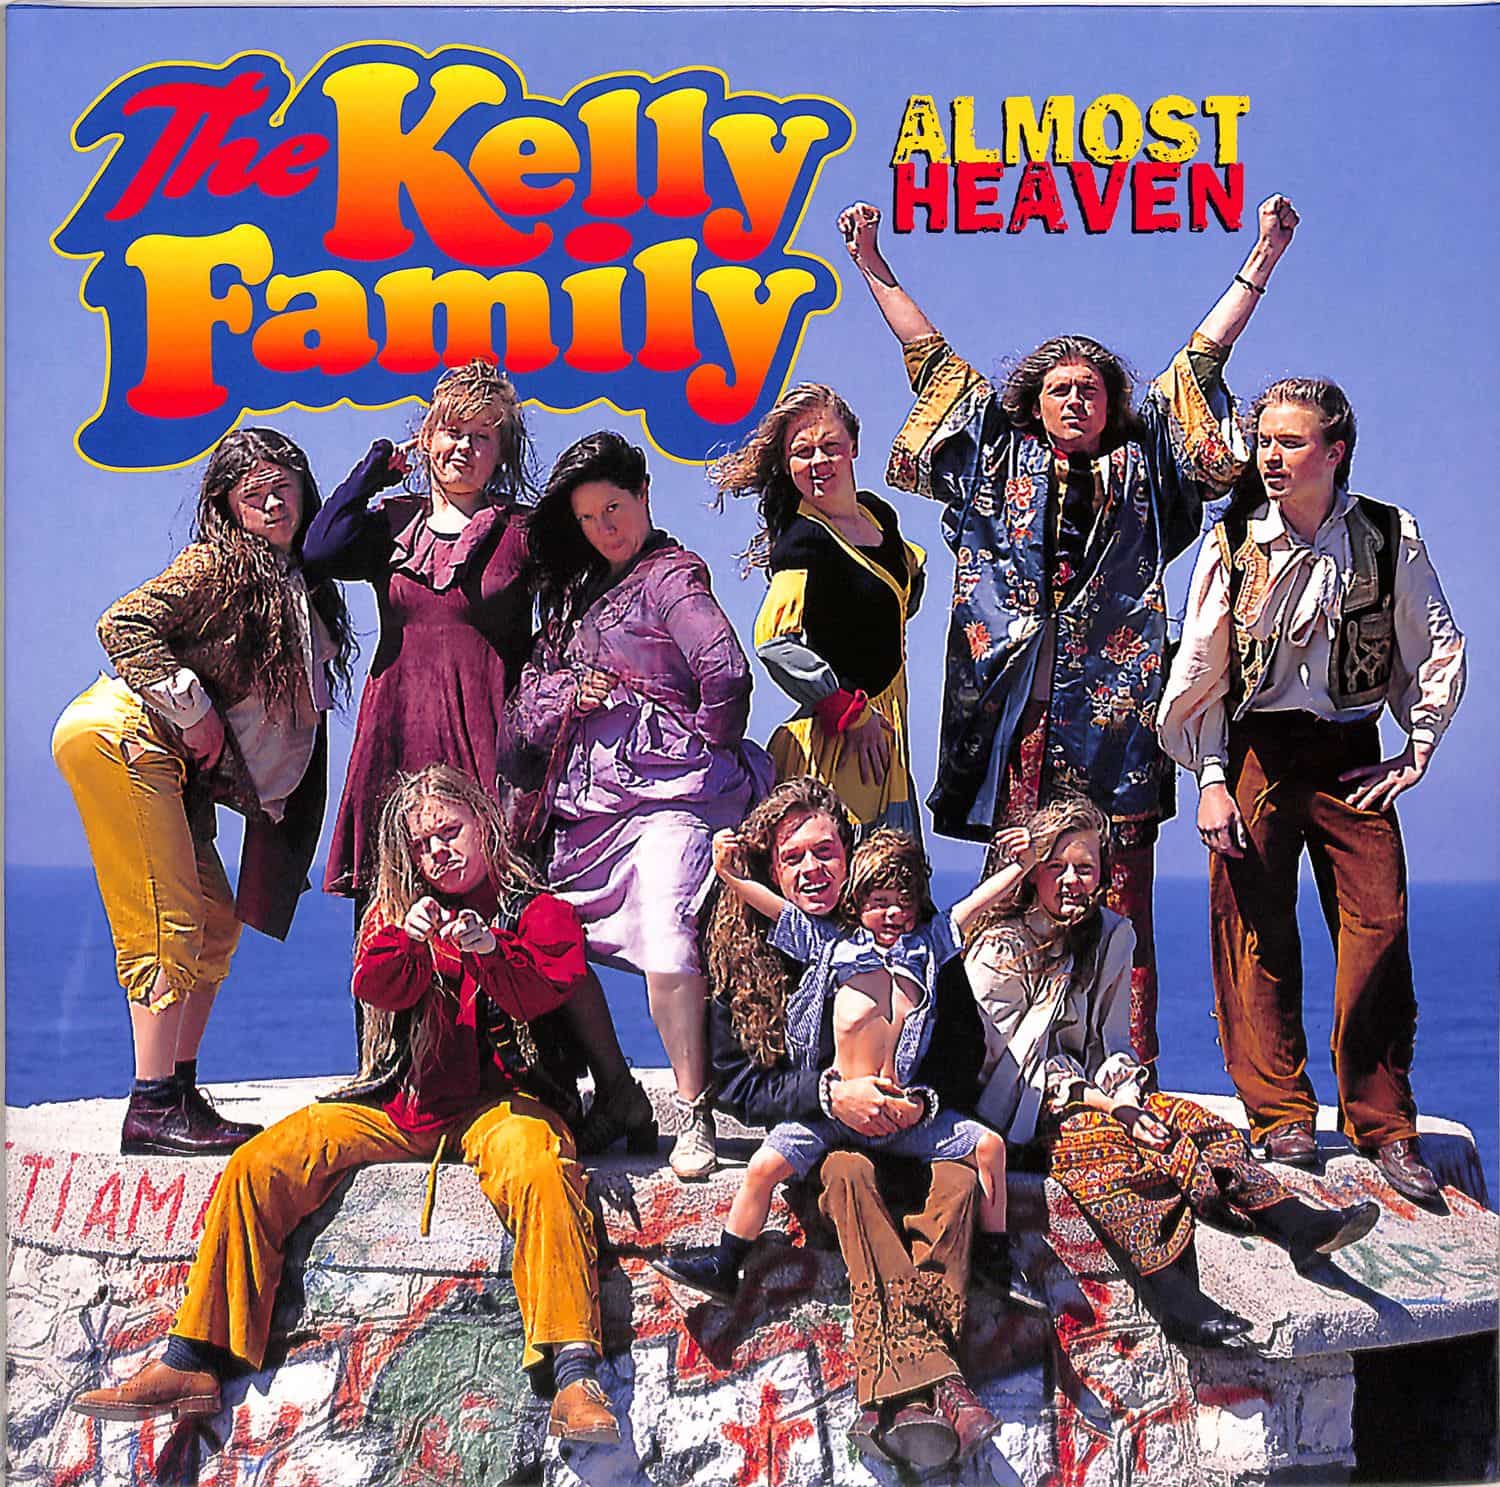 The Kelly Family - ALMOST HEAVEN 